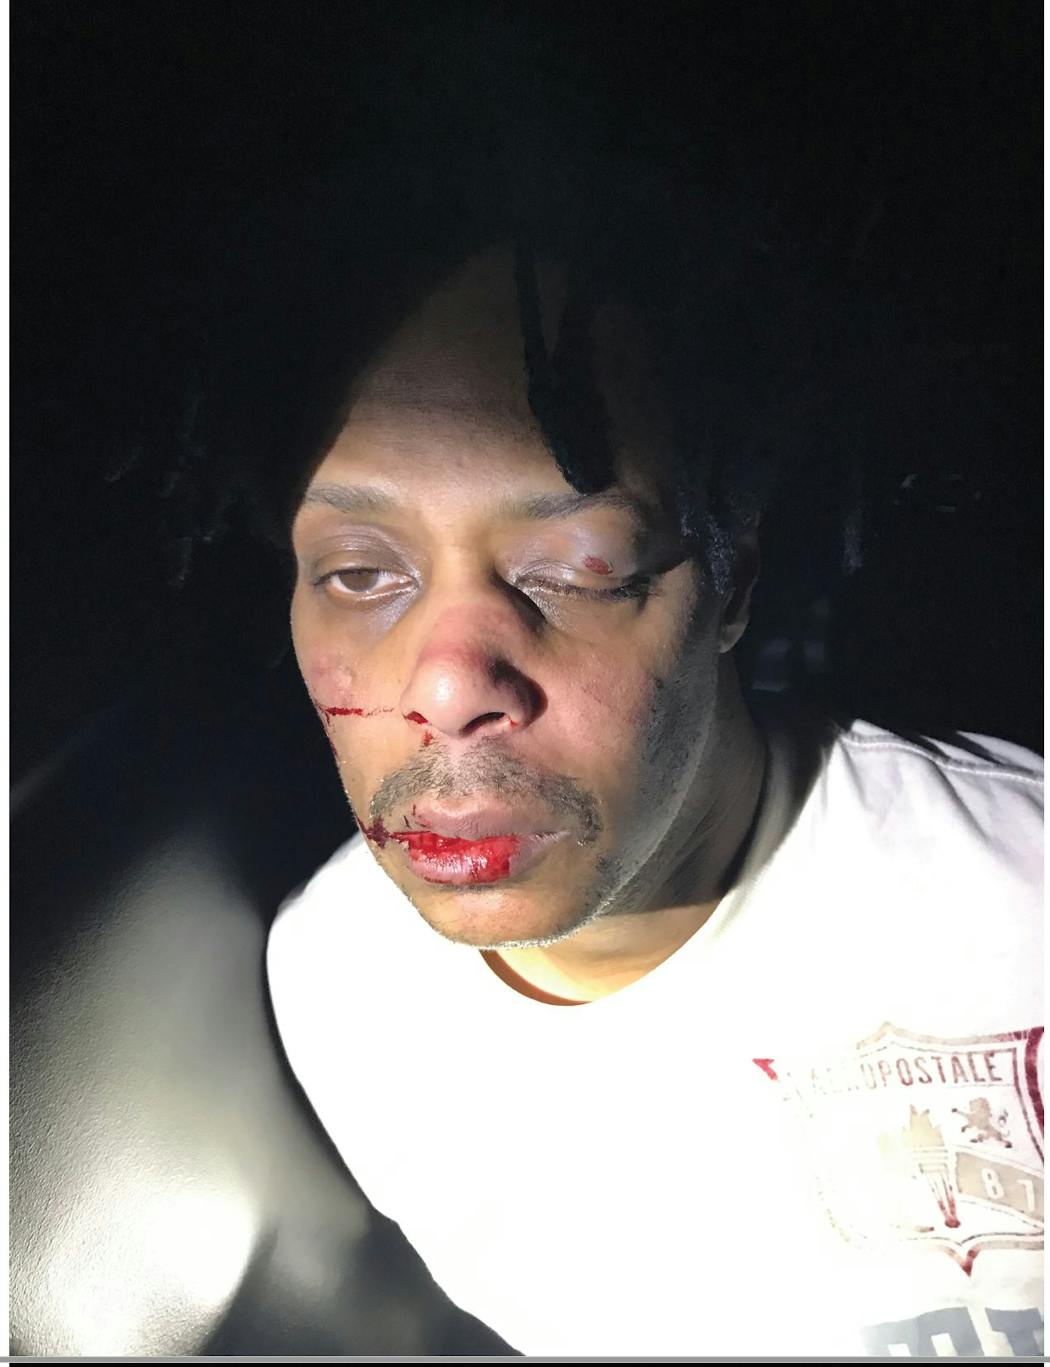 Photos taken by police and later obtained by public defenders show injuries to Andre Moore’s face after a December 2019 traffic stop by Minneapolis police.